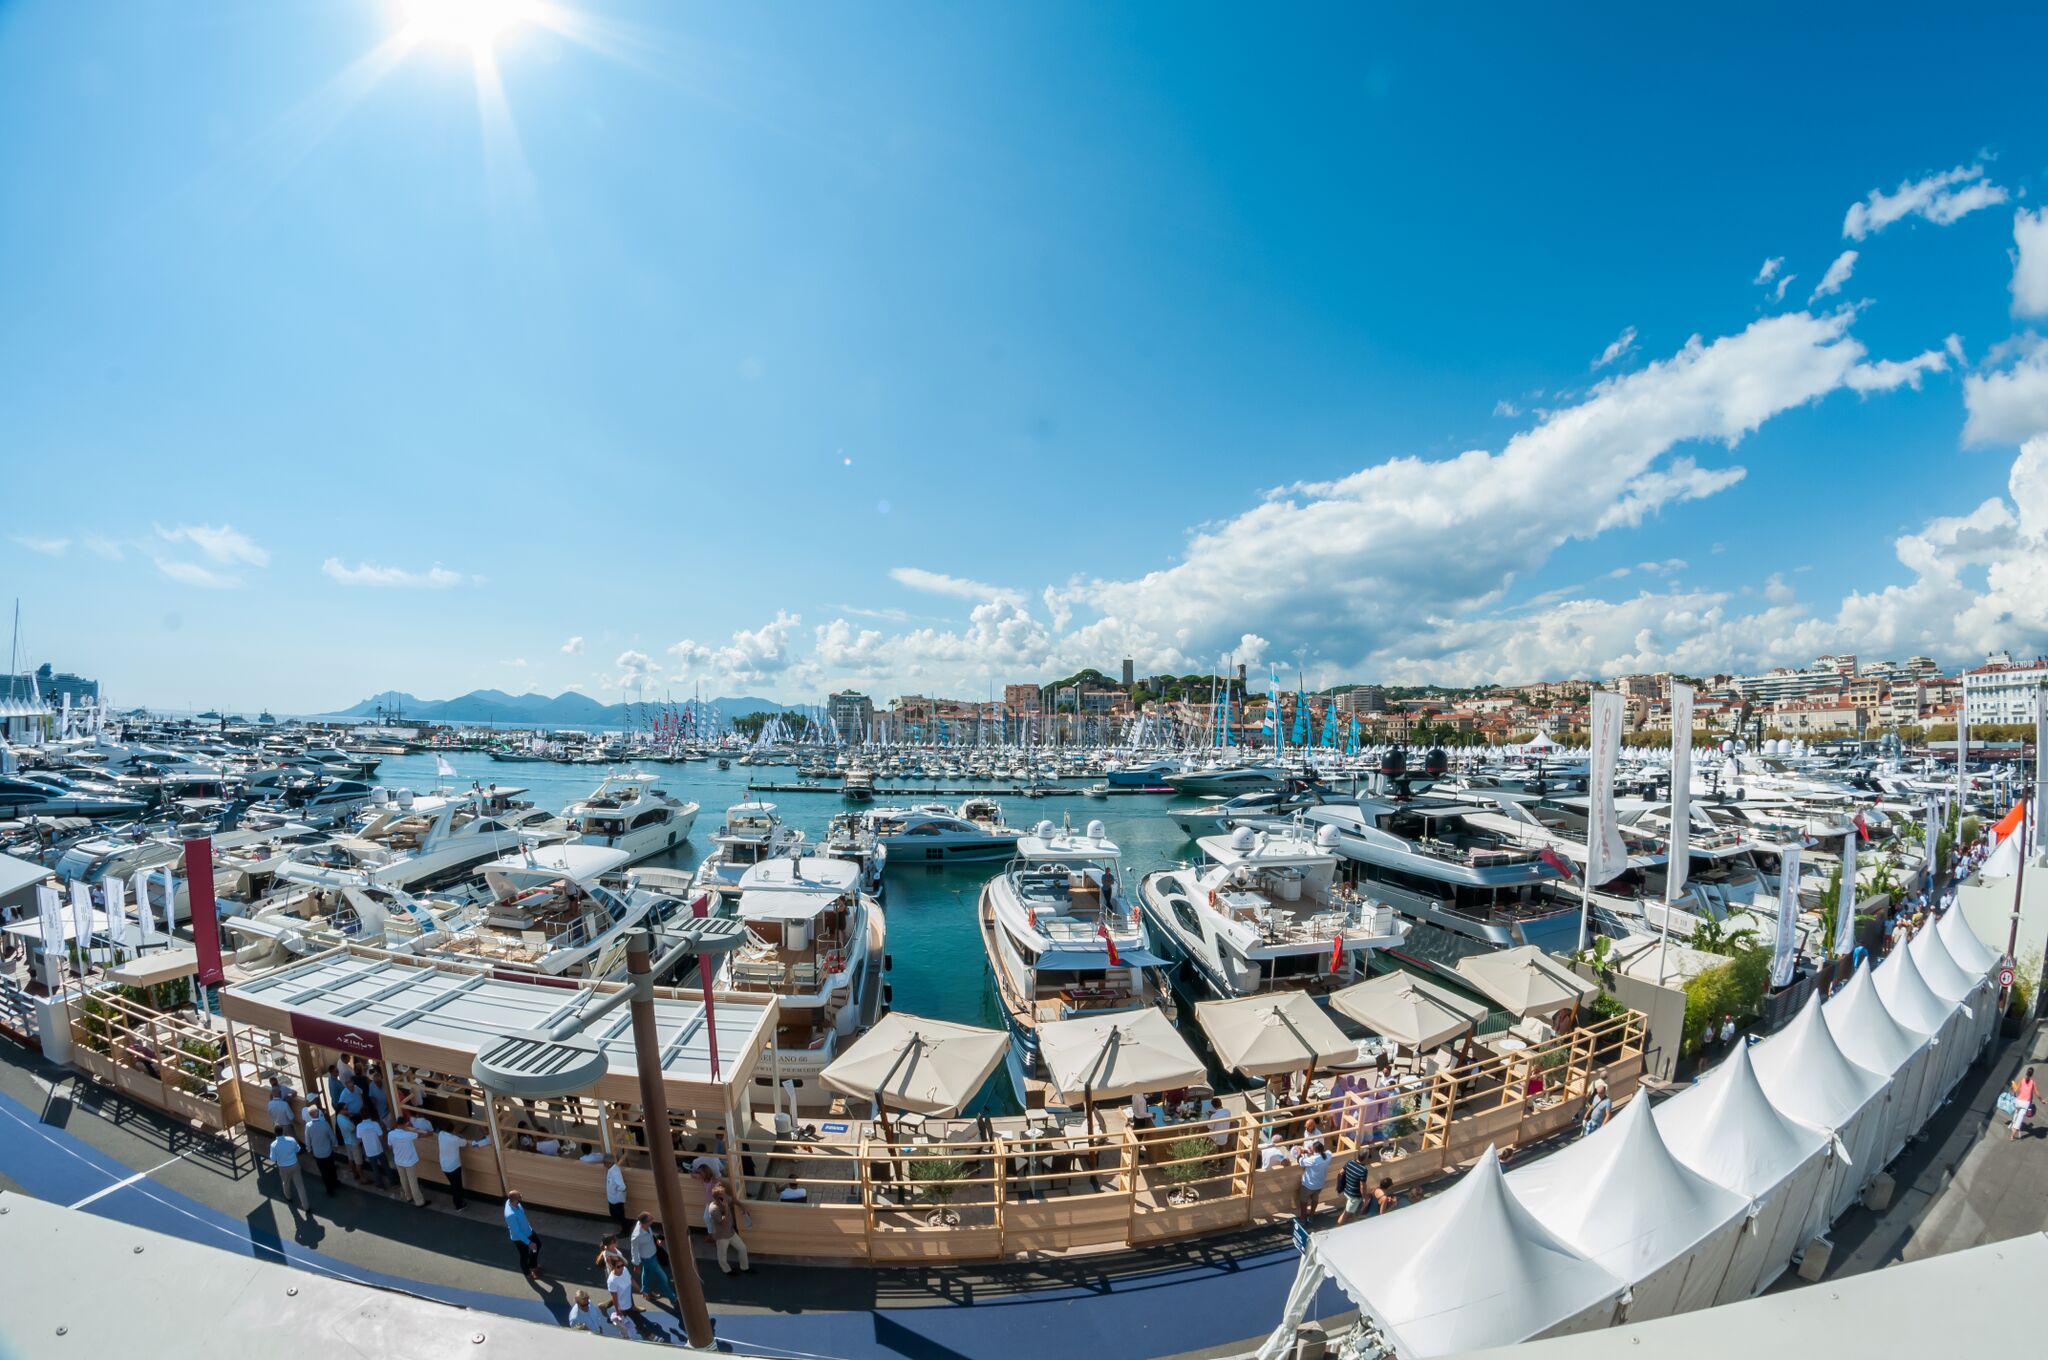 Late Summer Yachting Events on the Côte d’Azur